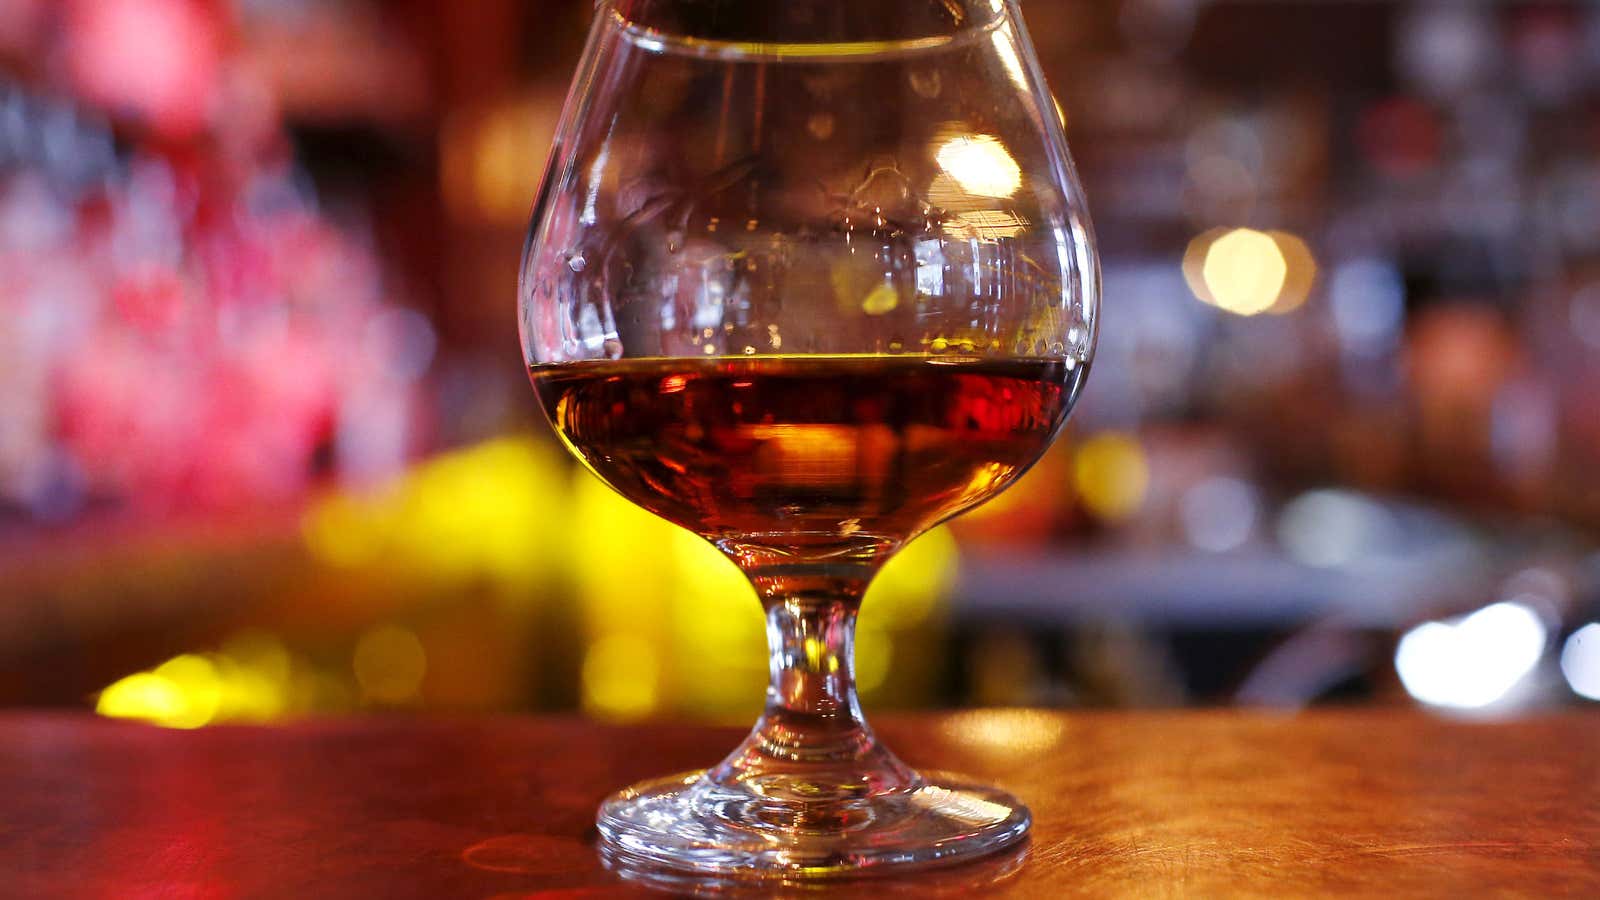 Americans are drinking lots of champagne and cognac